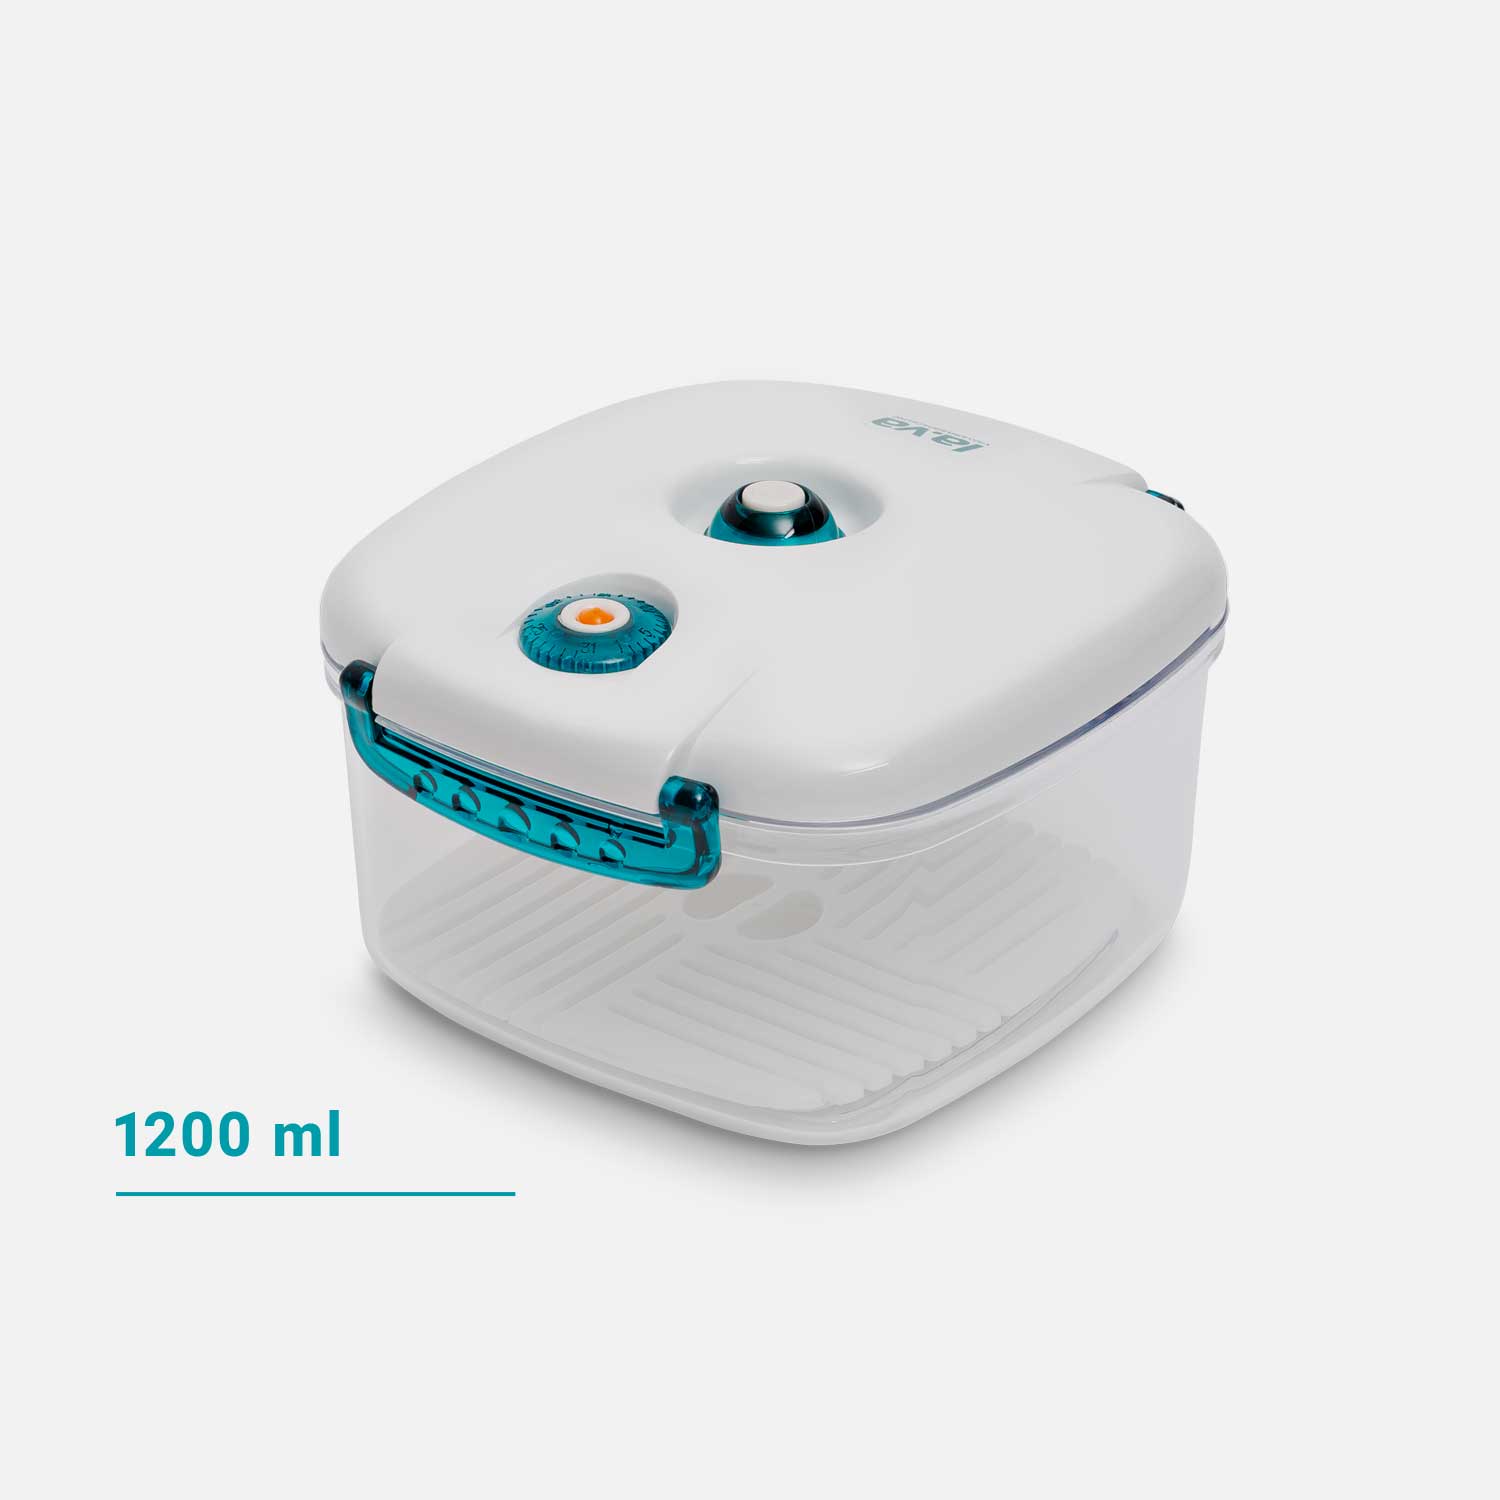 Square vacuum container made of transparent plastic with a white lid - 1200 ml